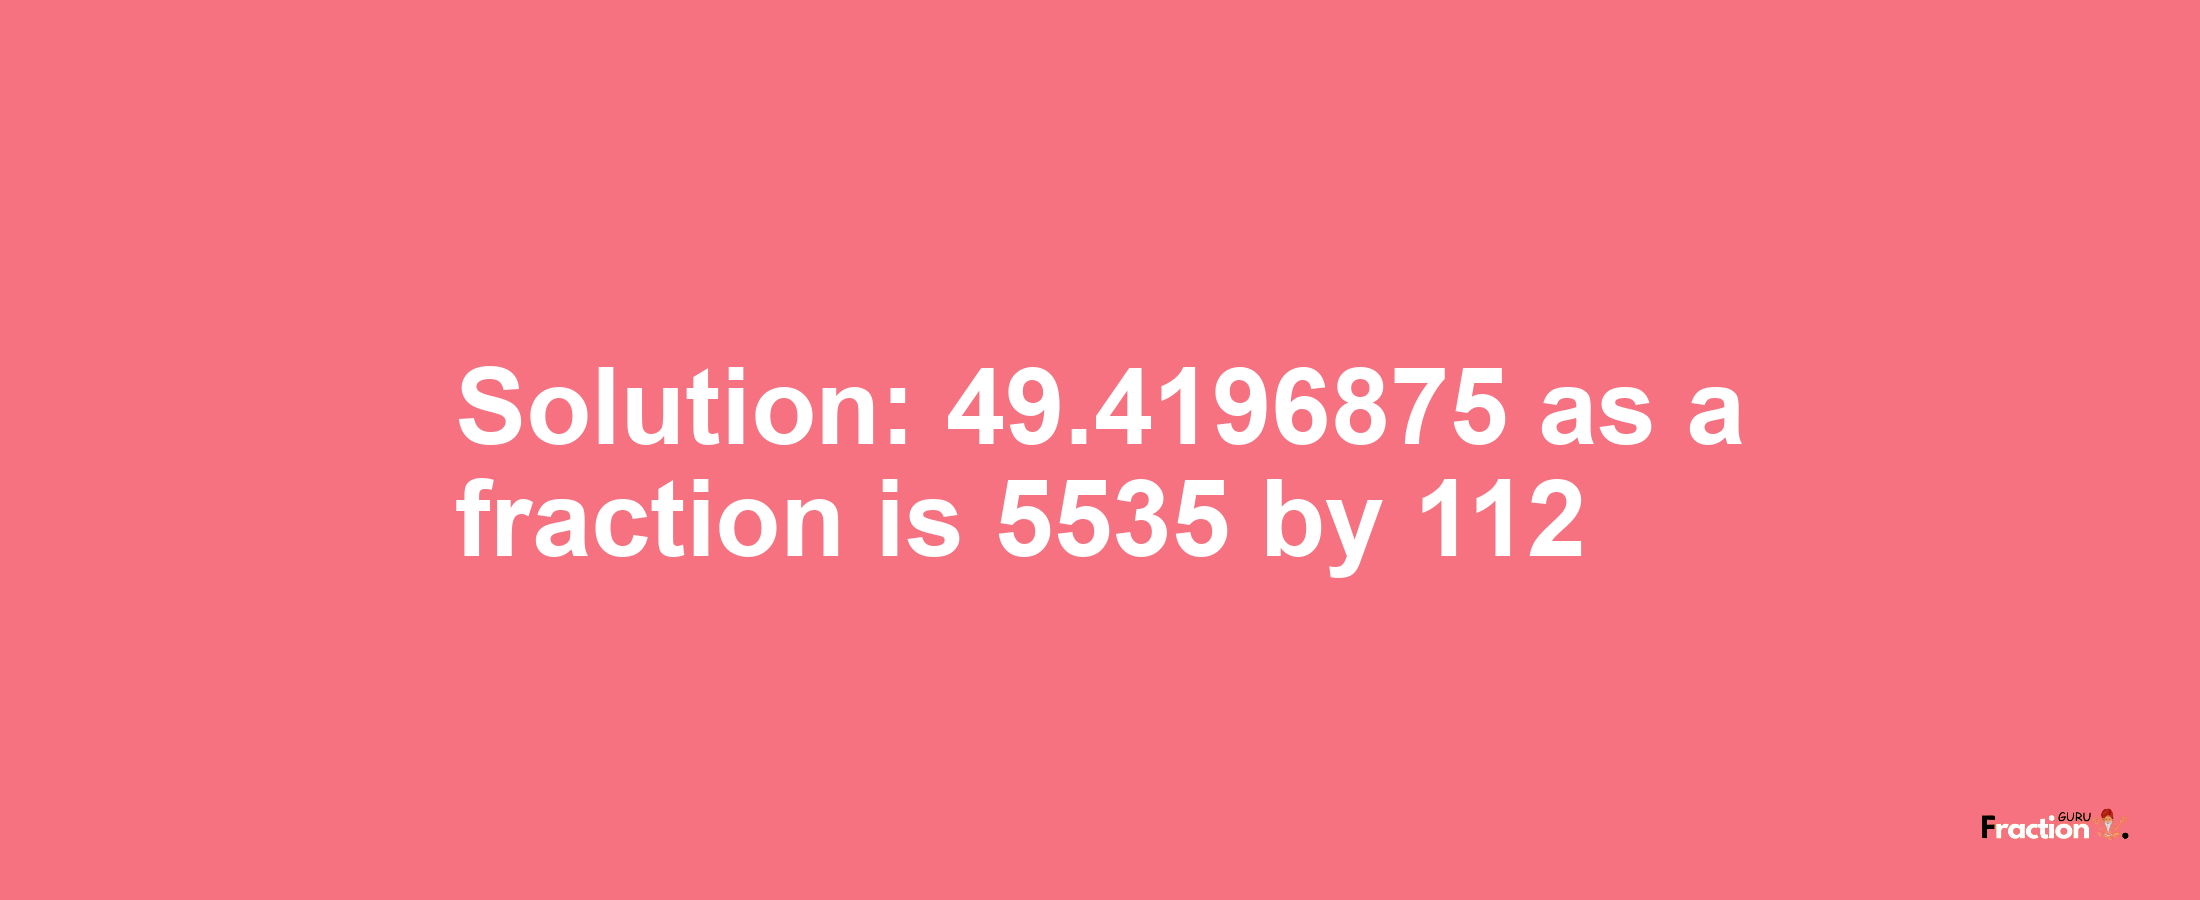 Solution:49.4196875 as a fraction is 5535/112